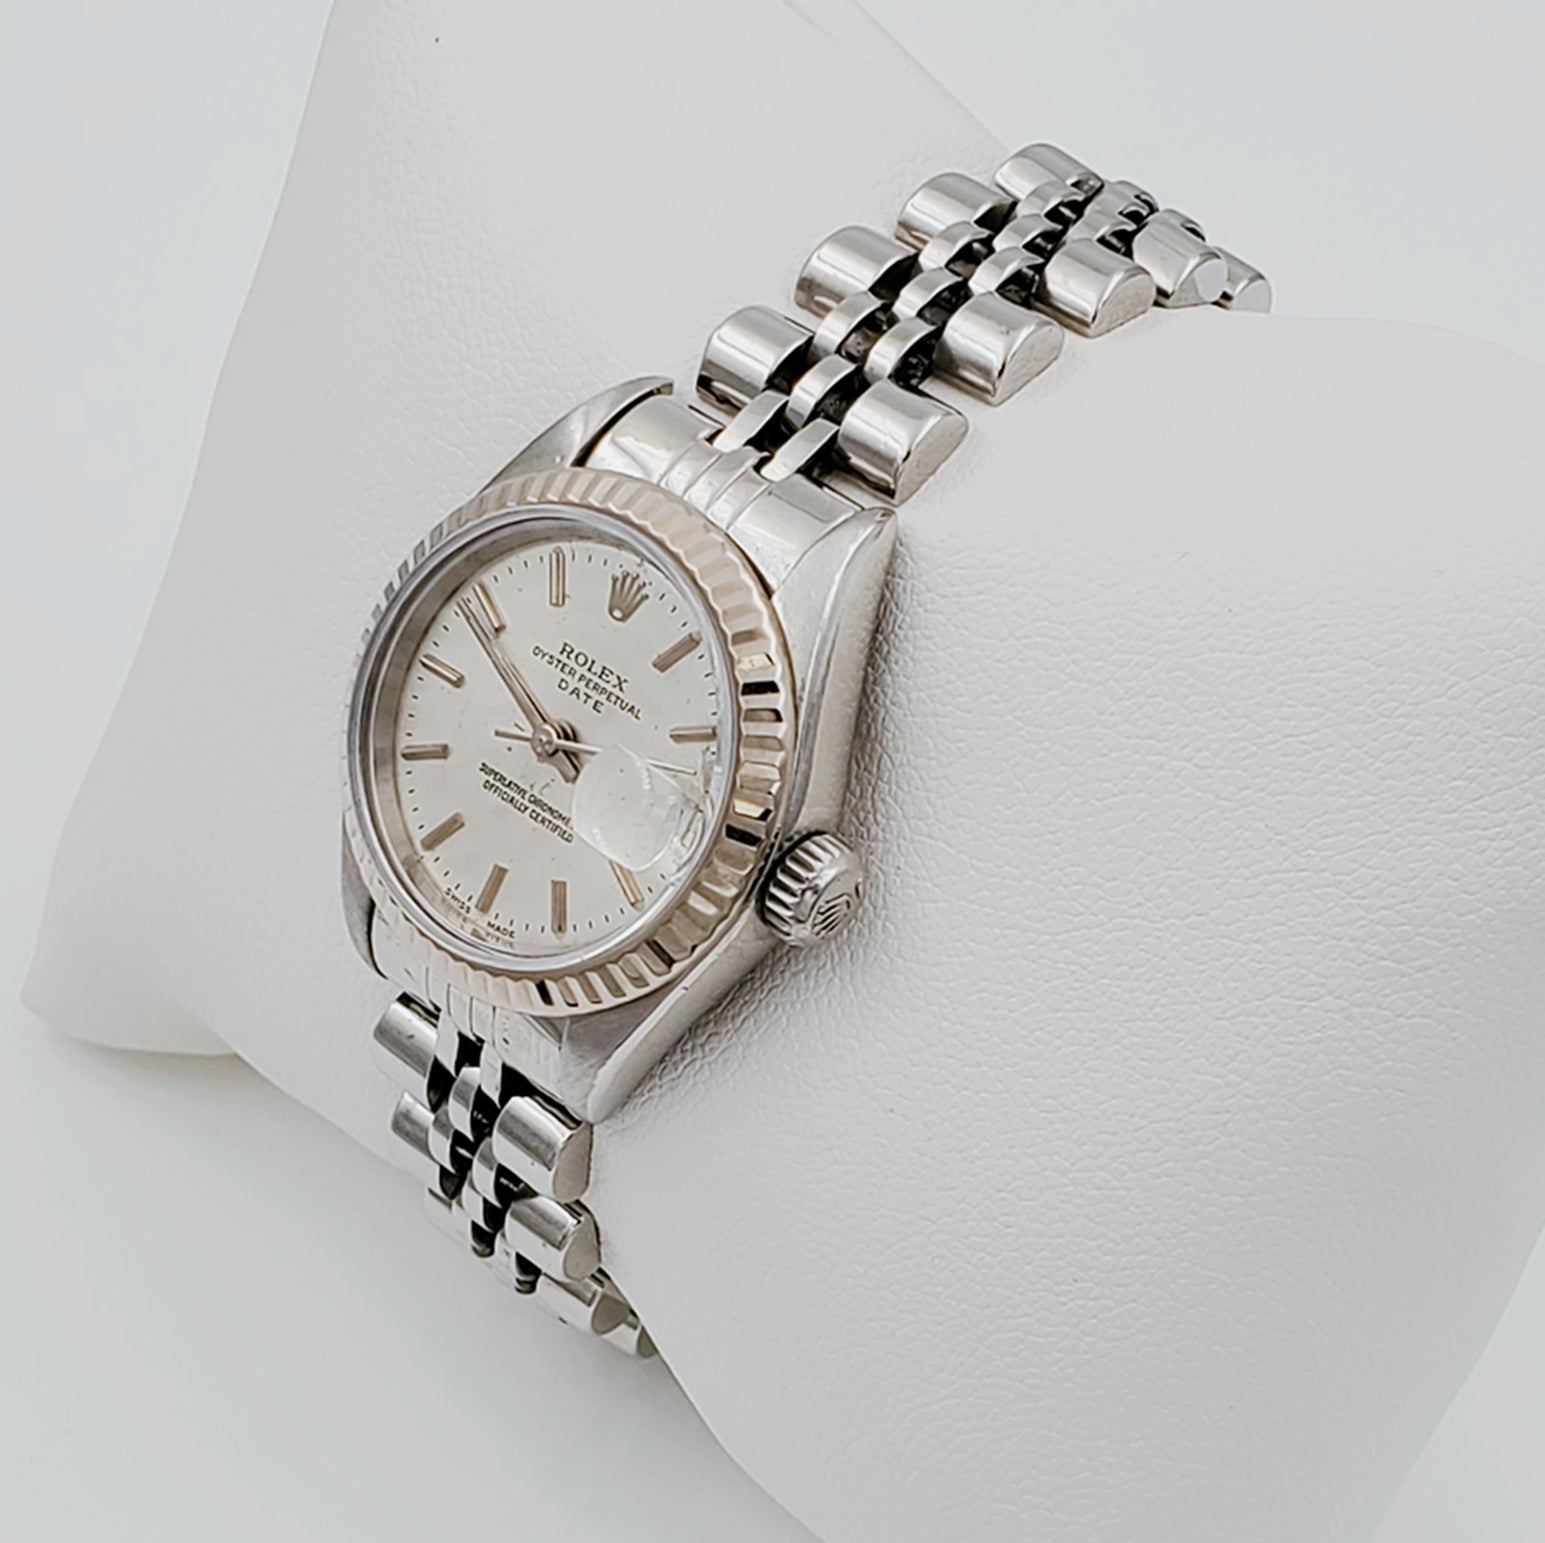 Women's Rolex 26mm DateJust 18K White Gold / Stainless Steel Watch with Silver Dial and Fluted Bezel. (Pre-Owned)